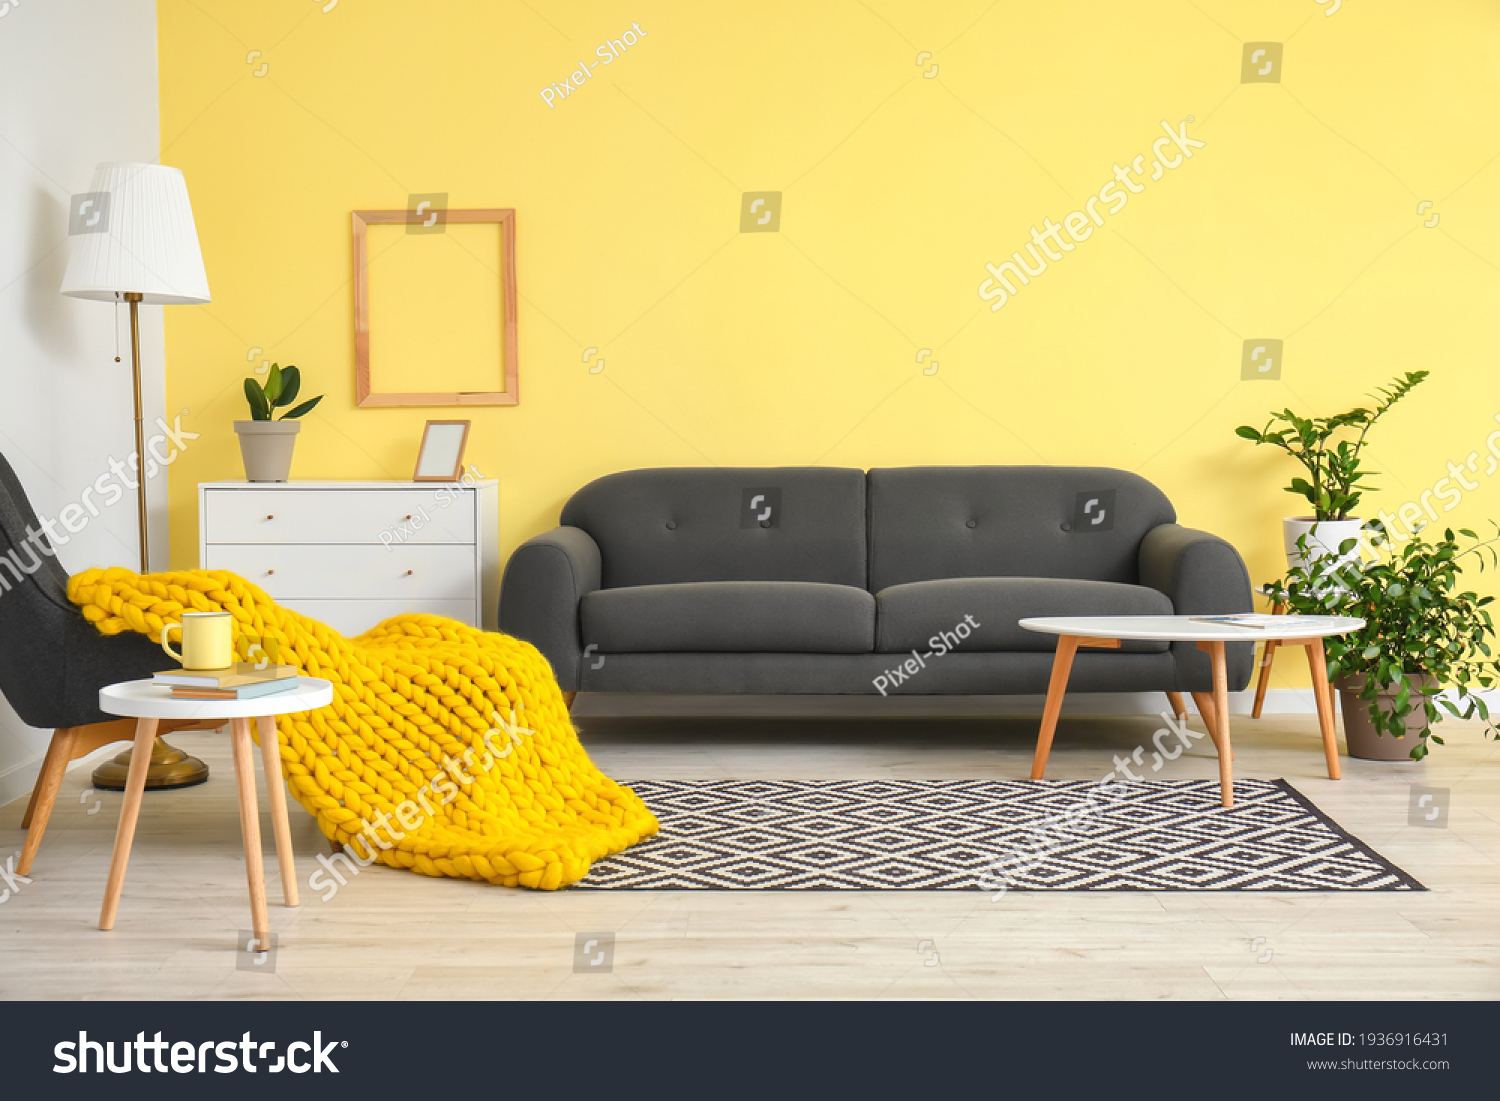 Interior of modern room with sofa, armchair and knitted plaid #1936916431